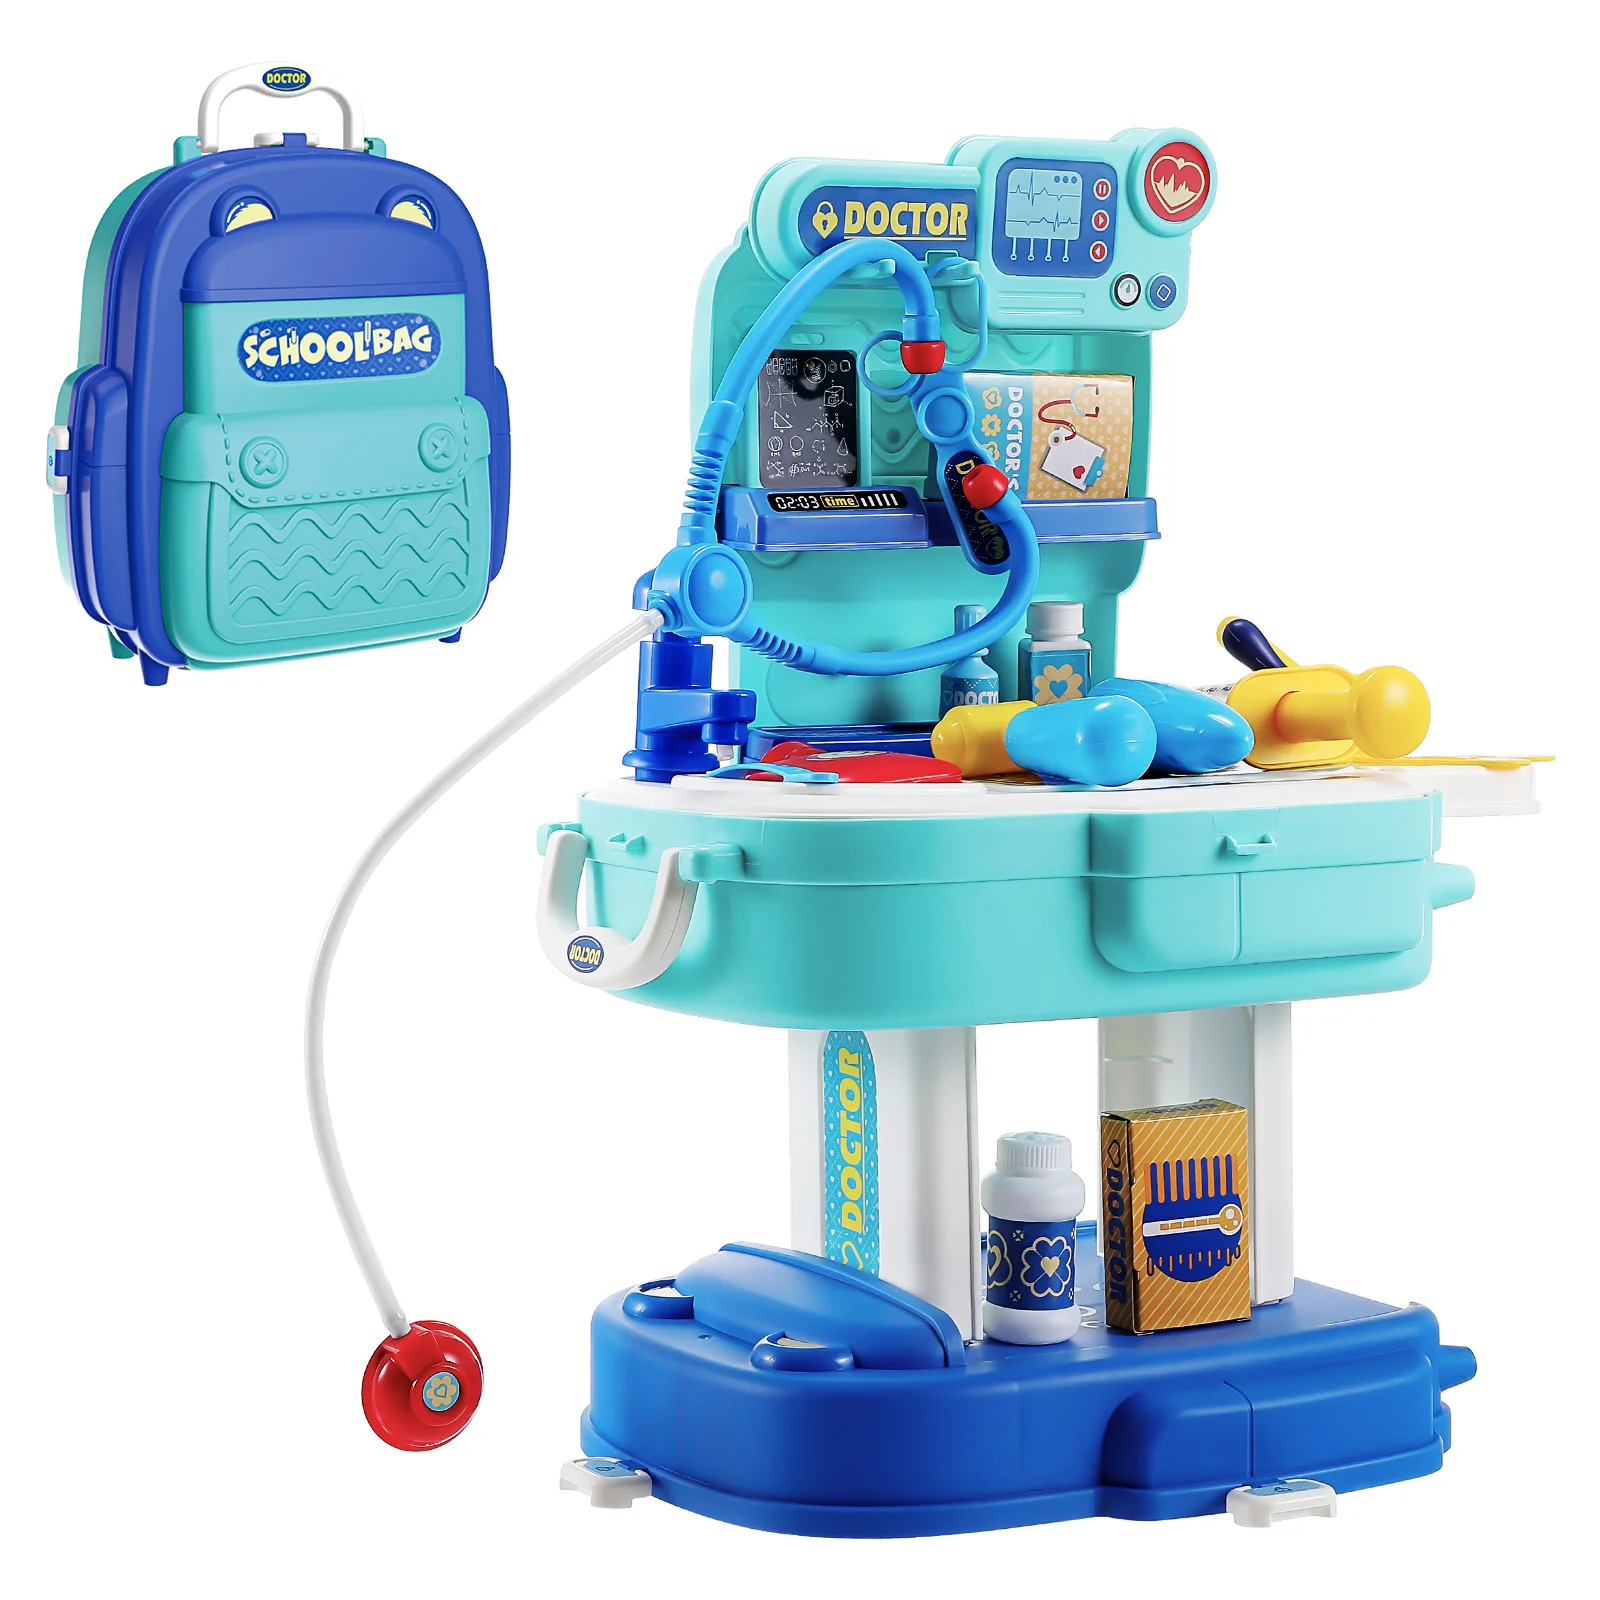 

Toyvian 31pcs Simulated Doctor Kit 2 in 1 Pretend Play Set Carrier Backpack Toy Educational Toy for Boy Girl Gifts